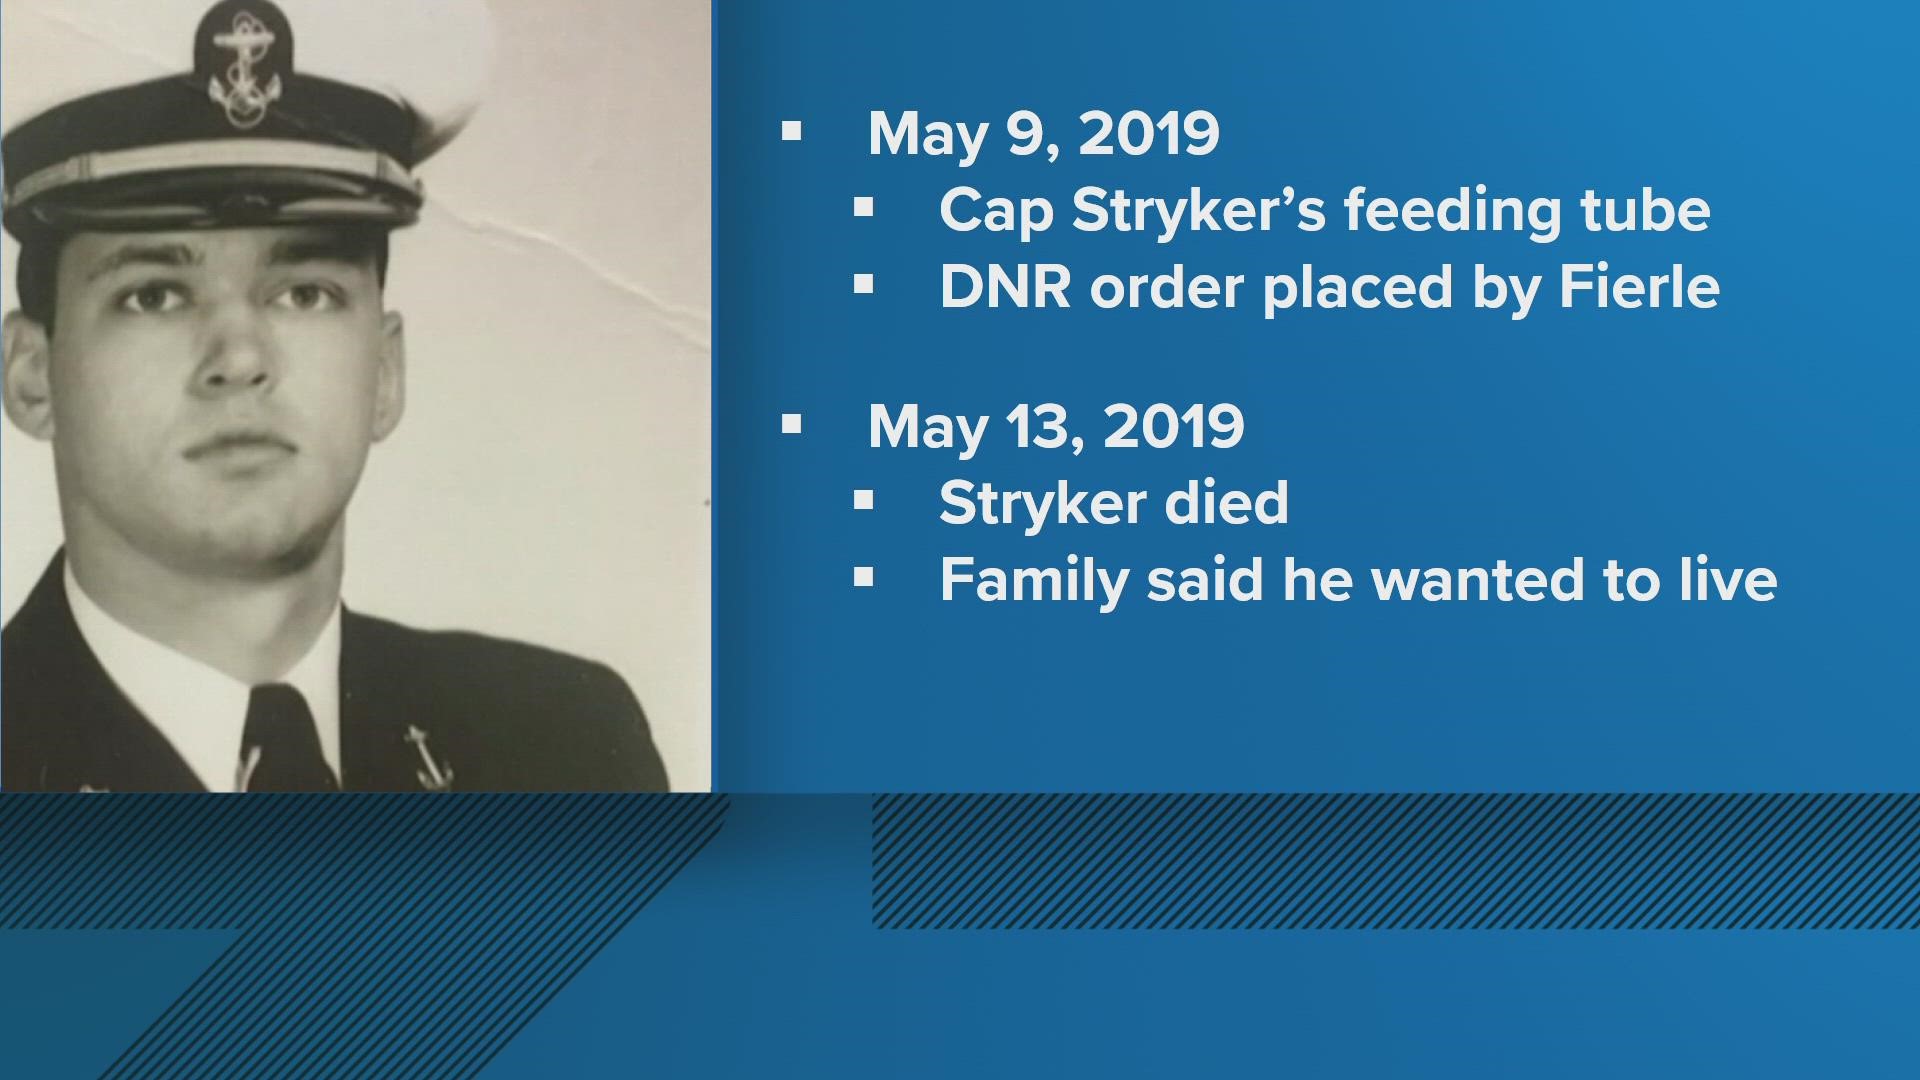 In February 2020, Rebecca Fierle was arrested and charged with aggravated abuse and neglect of an elderly person in relation to the death of Steven Stryker.